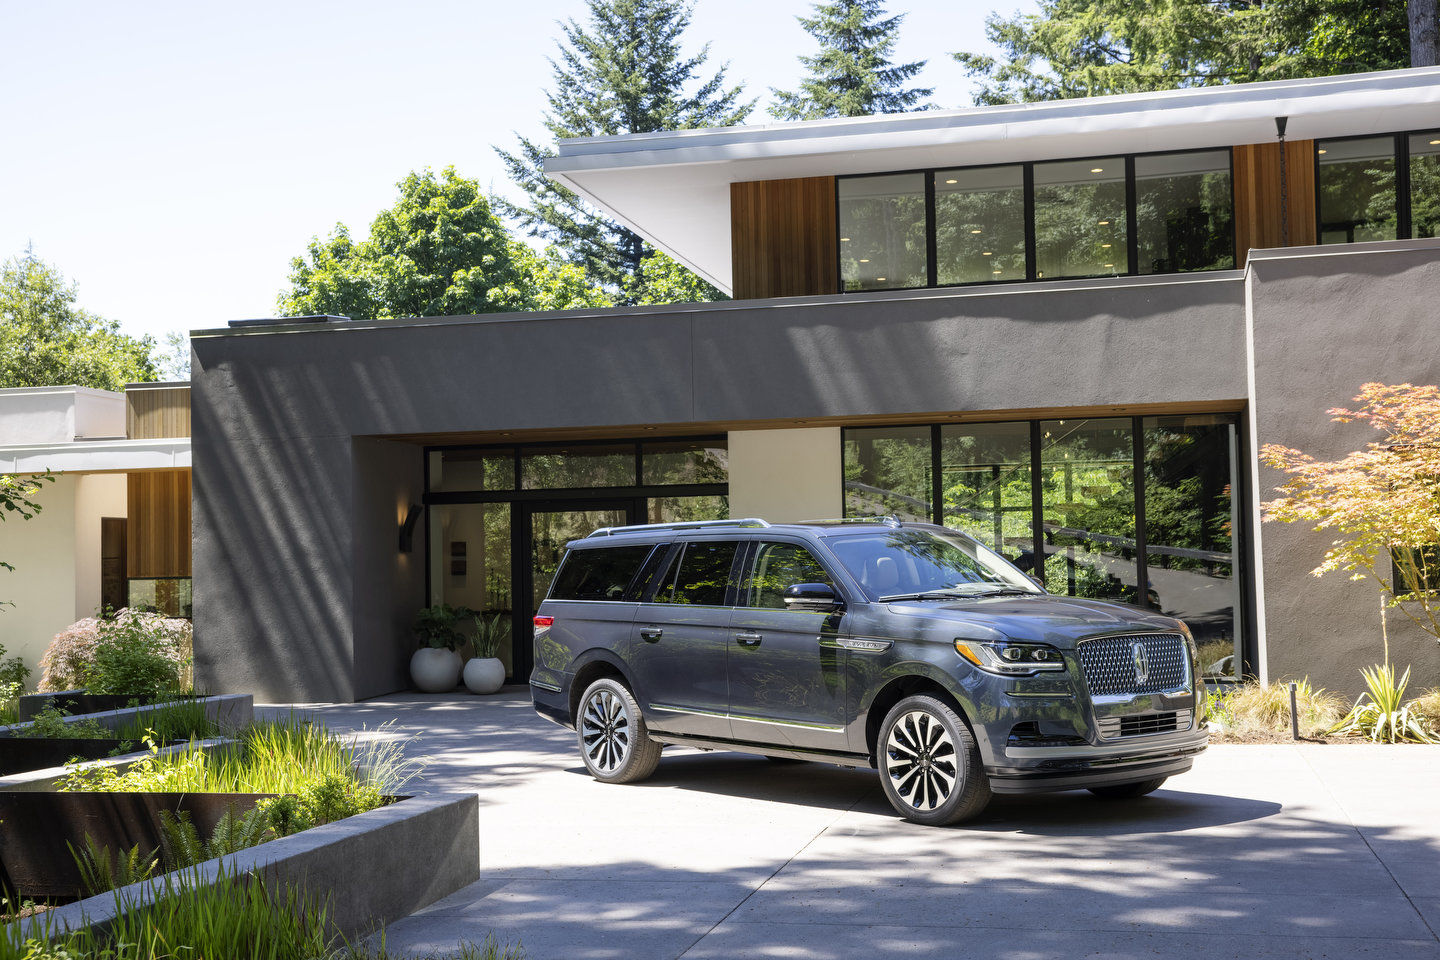 Smart Luxury, Smart Choice: Why a Pre-Owned Lincoln Navigator Makes Sense